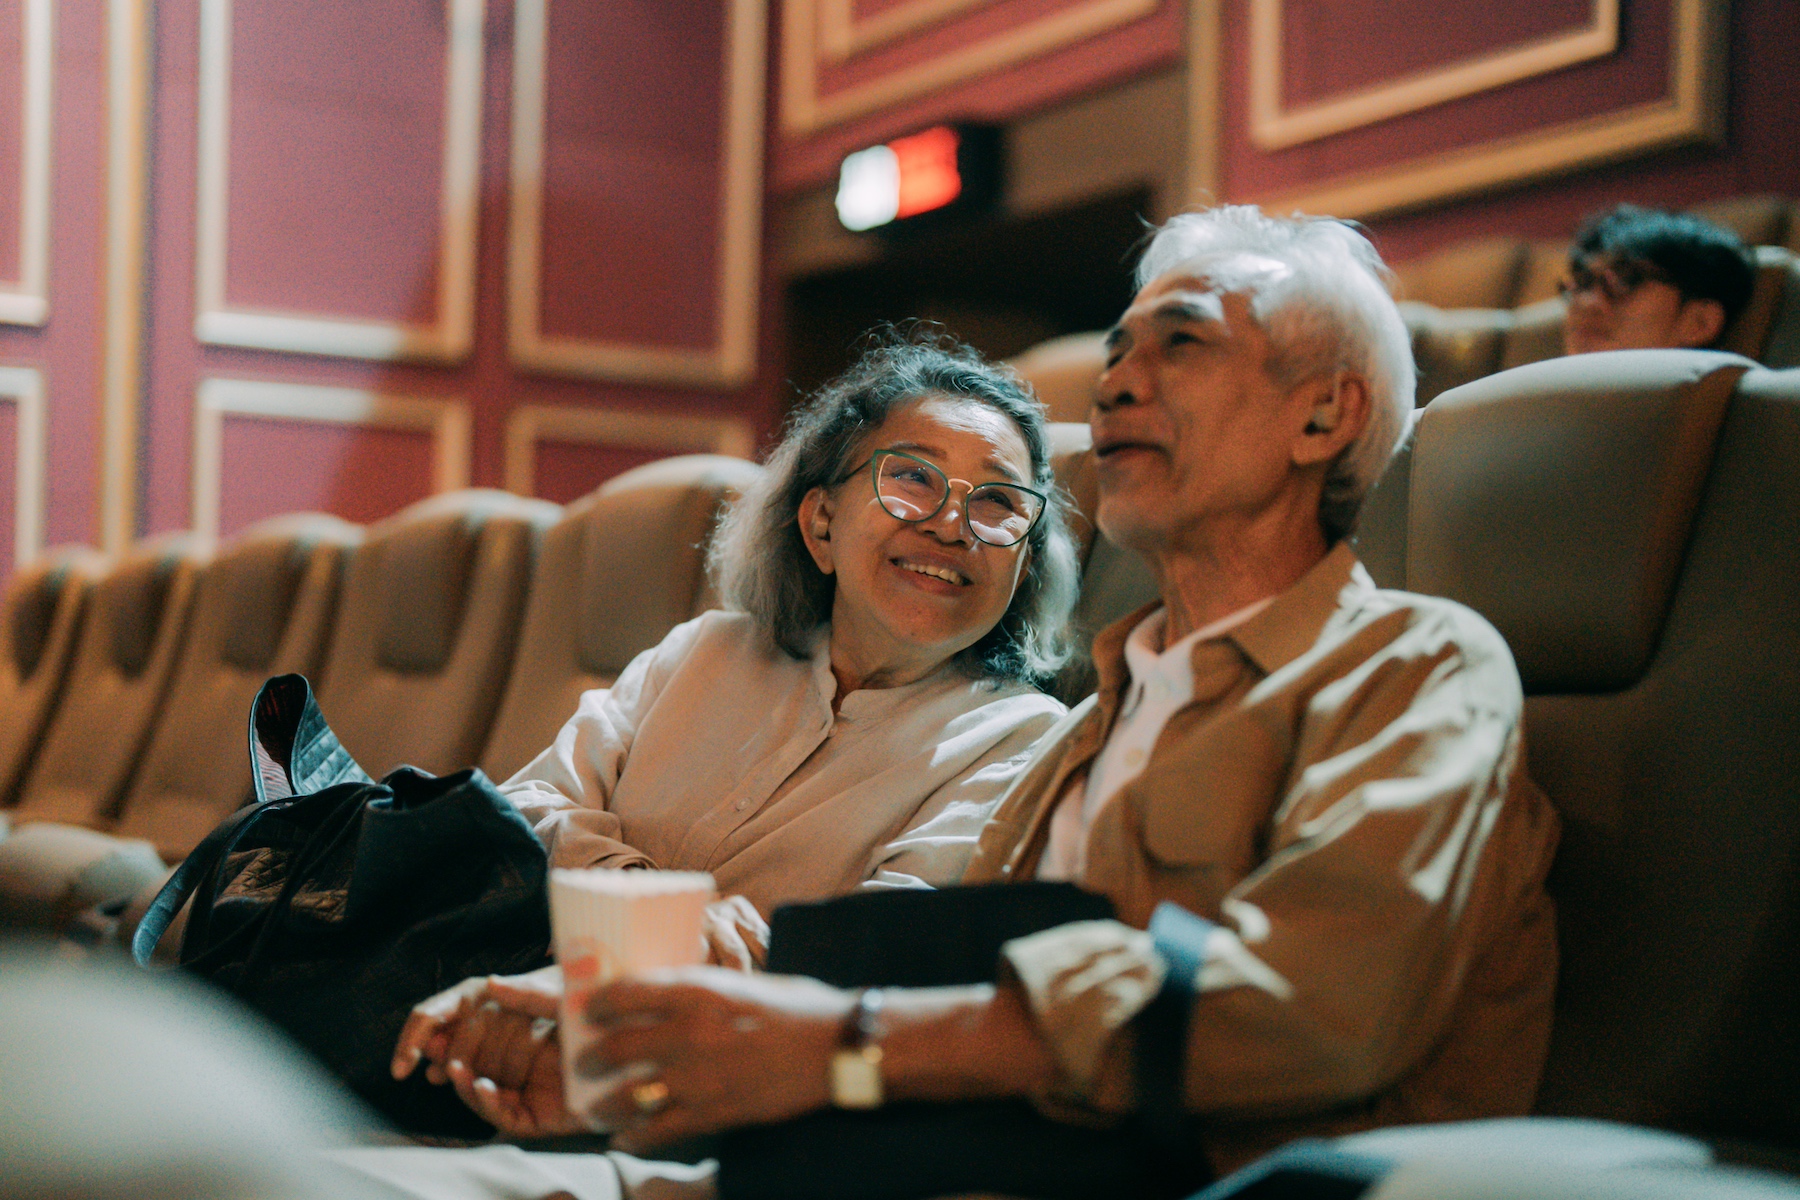 An older couple waits excitedly for the movie to start at the theater